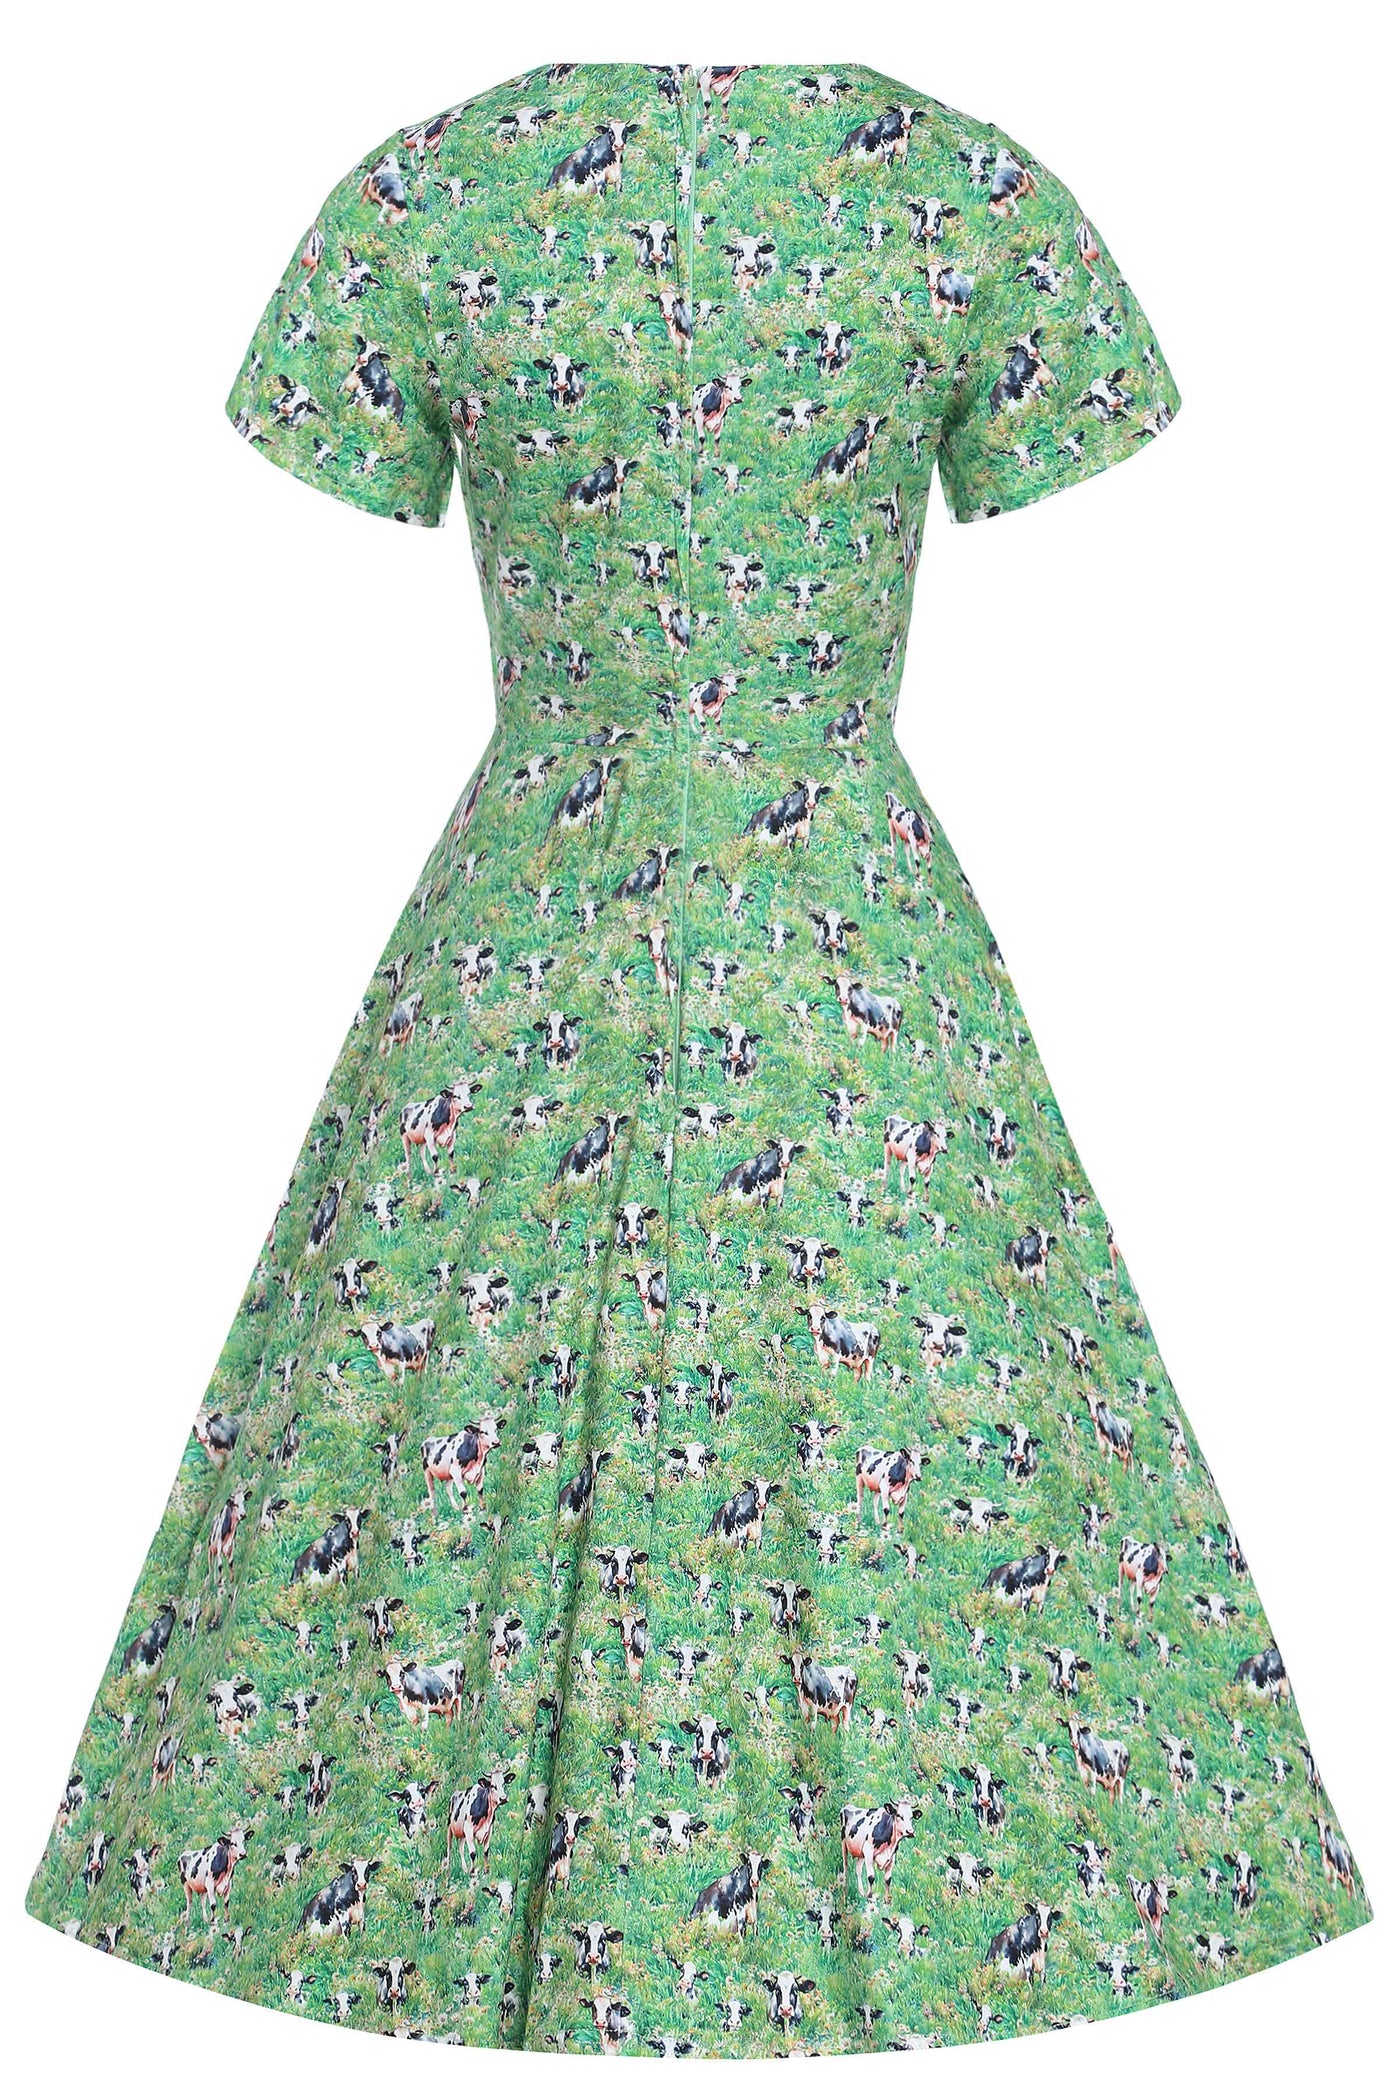 Back View of Dairy Cow Field Short Sleeved Dress in Green